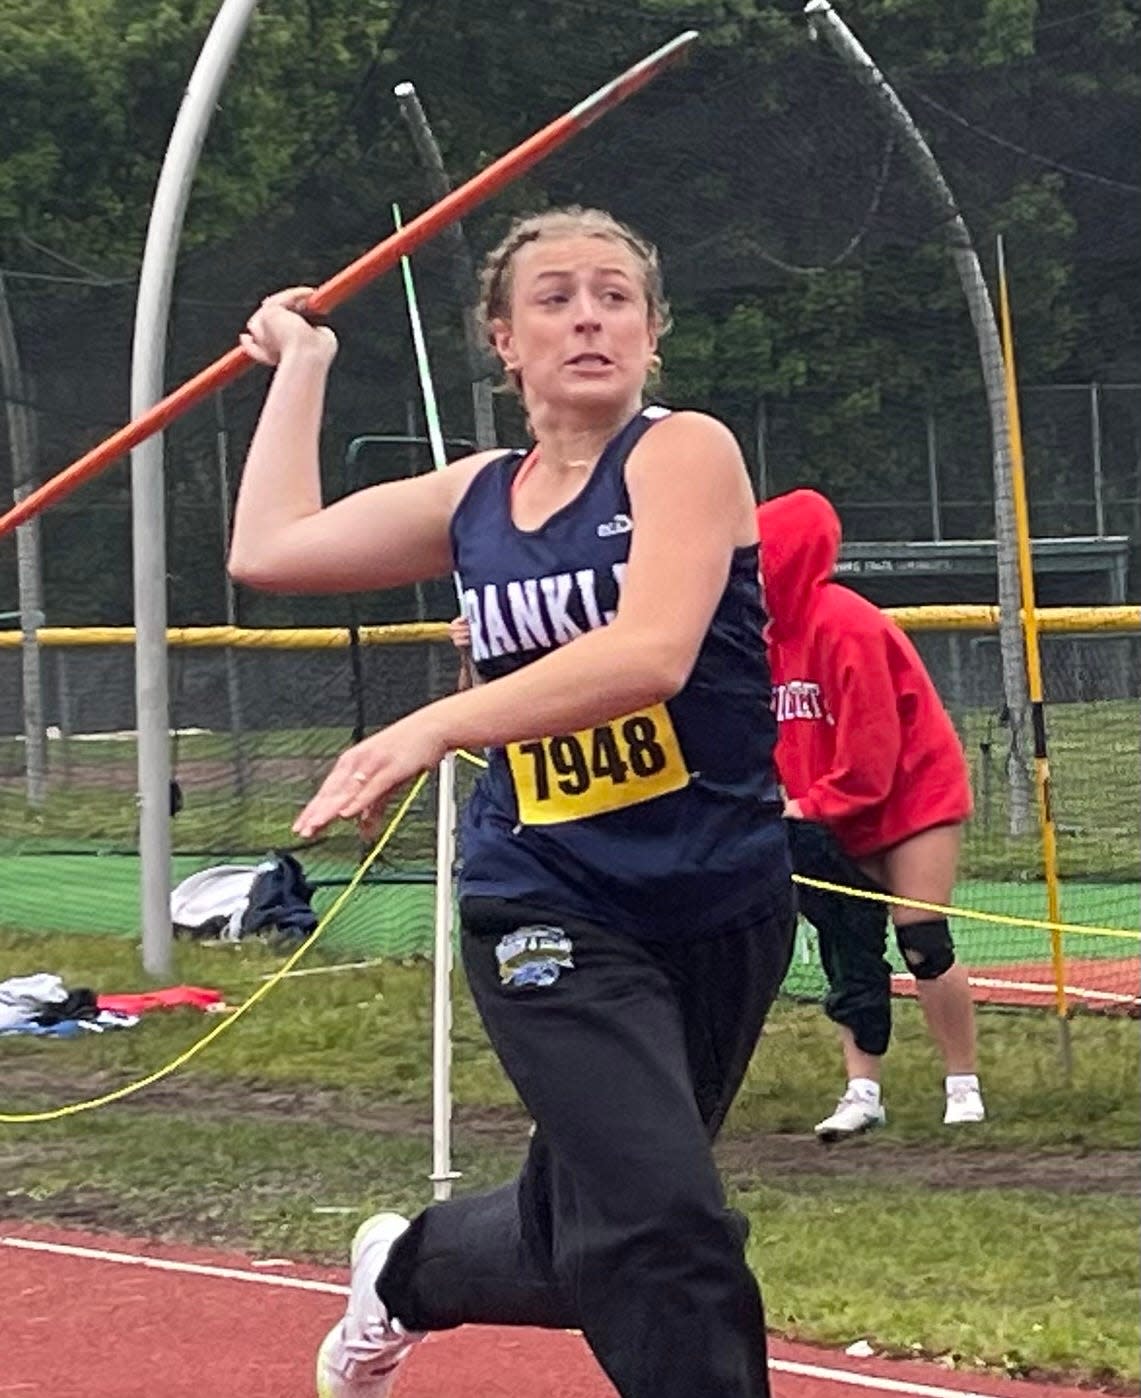 Franklin’s Liz Hopkins won the javelin on Saturday at the Meet of Champions in Fitchburg.